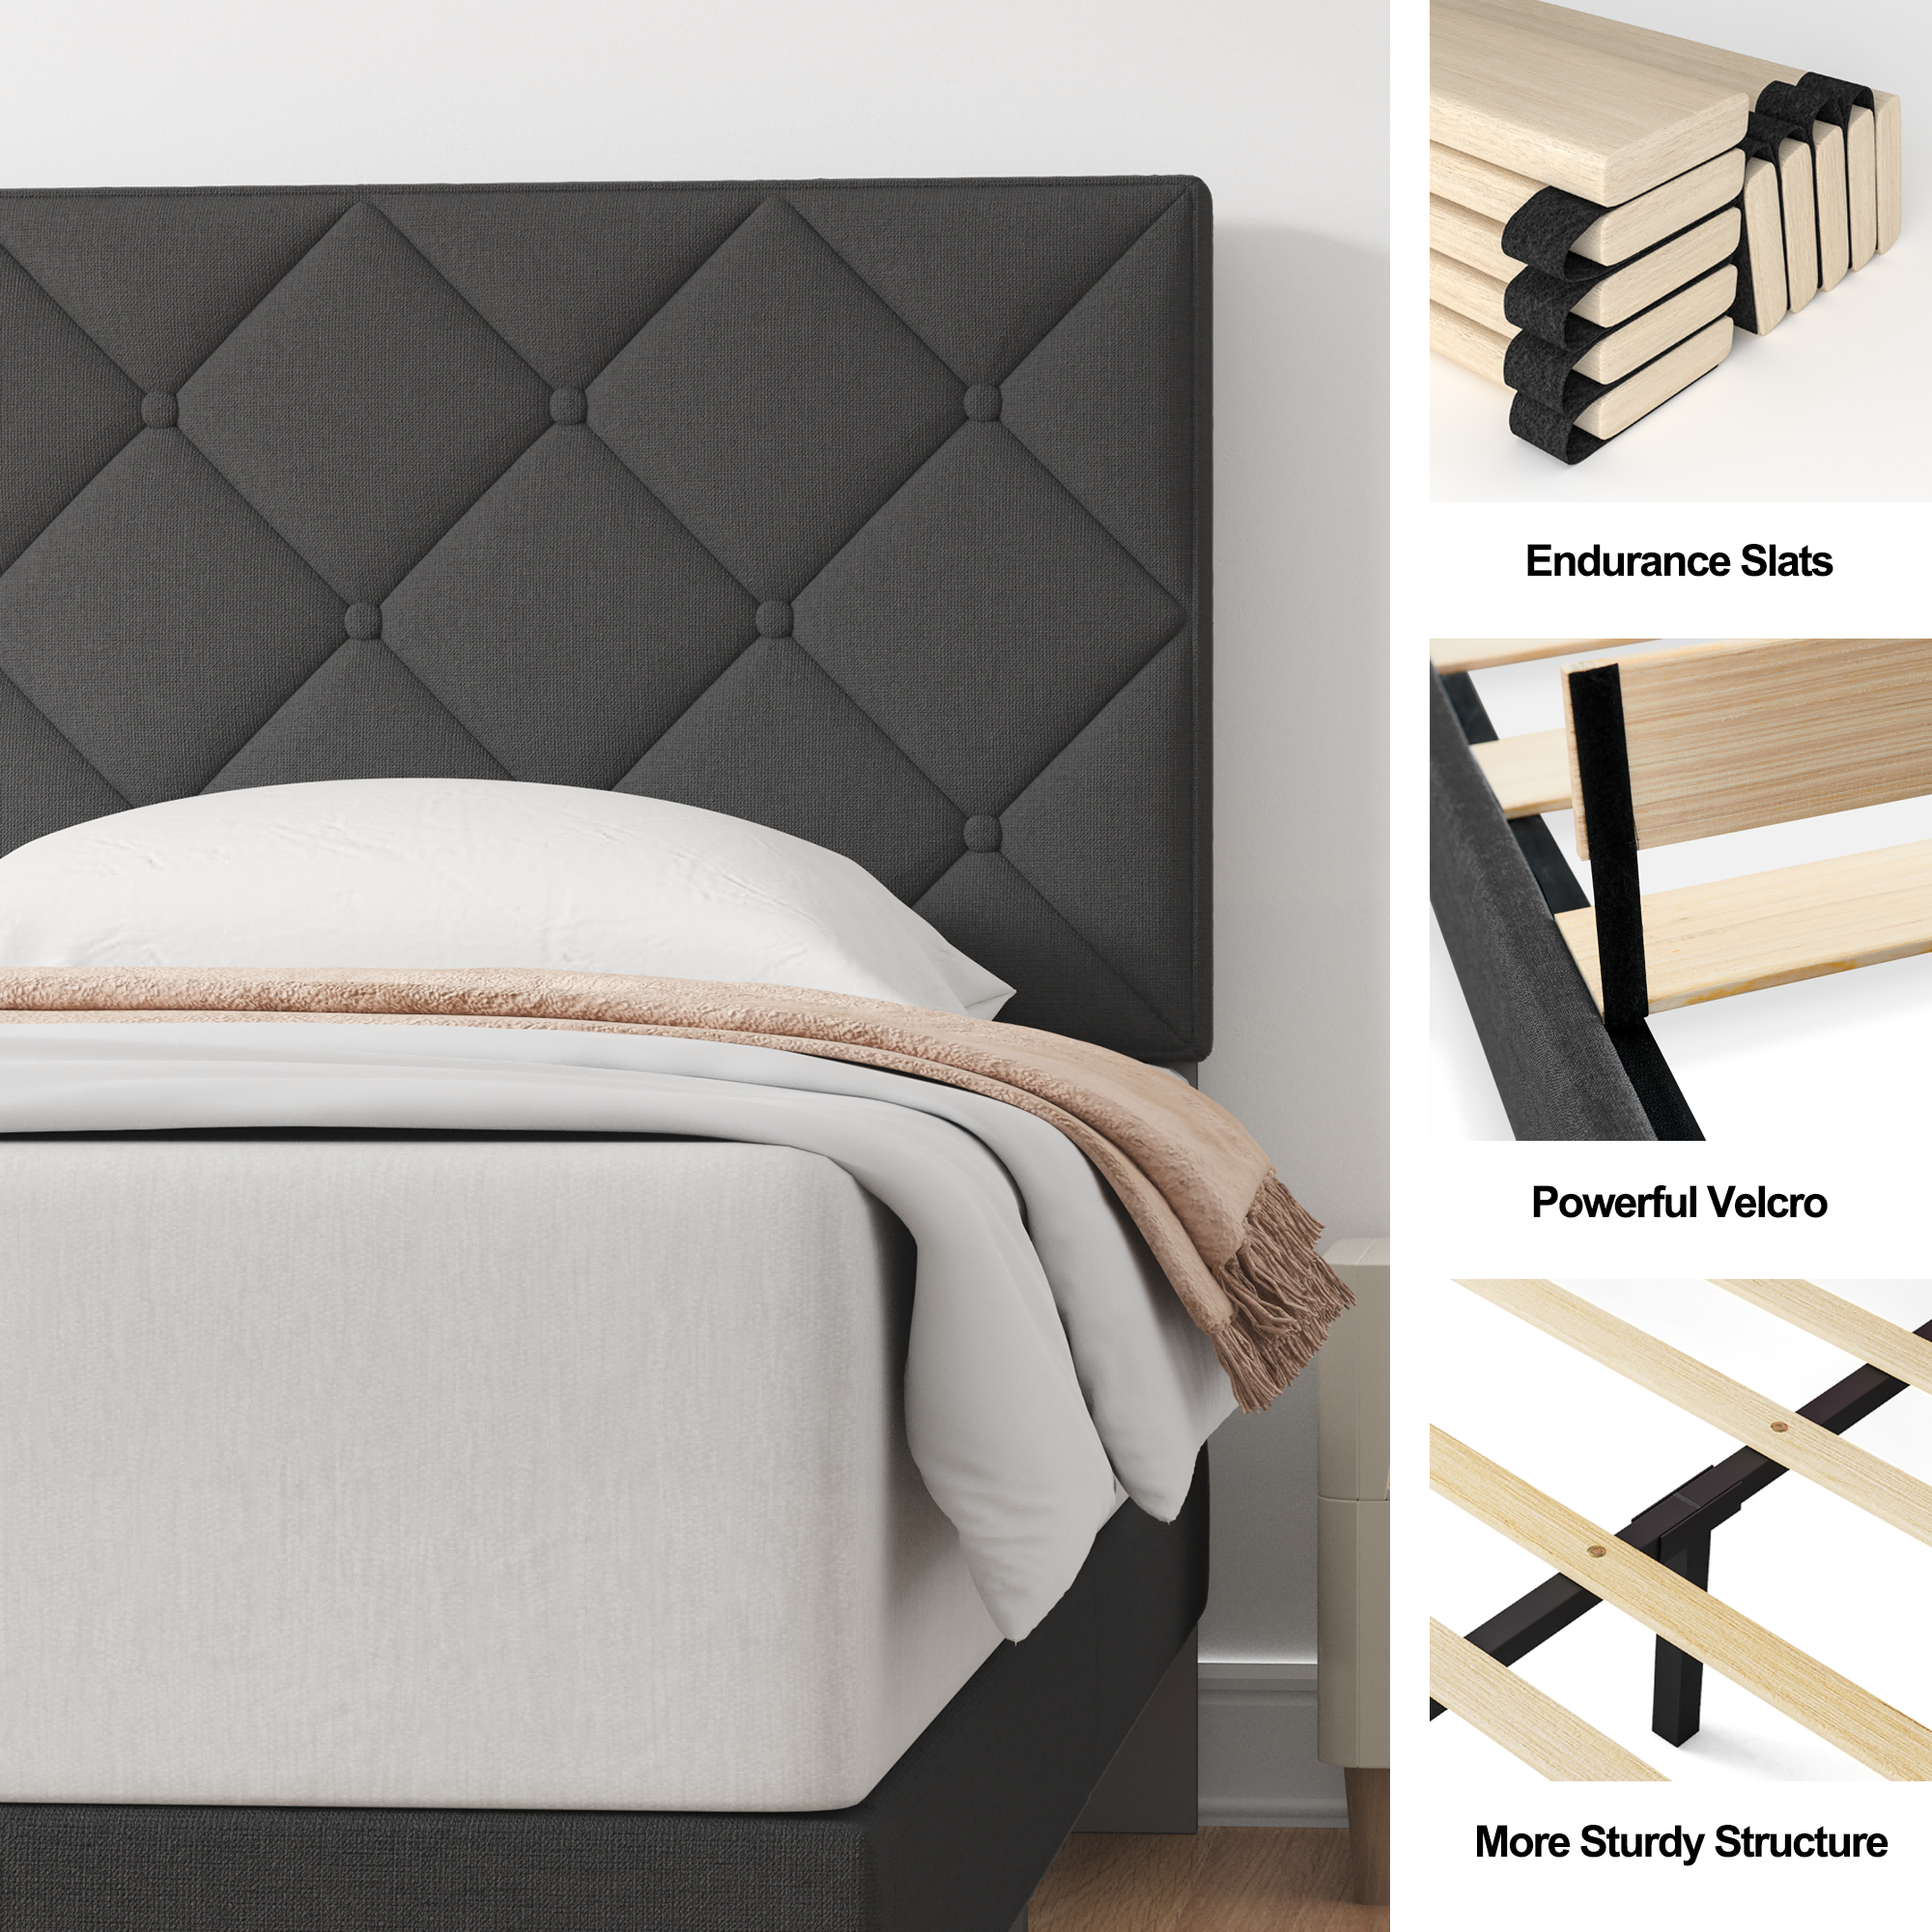 Queen Bed, HAIIDE Queen Size bed Frame with Fabric Upholstered Headboard,Dark Grey, Easy Assembly - image 5 of 7